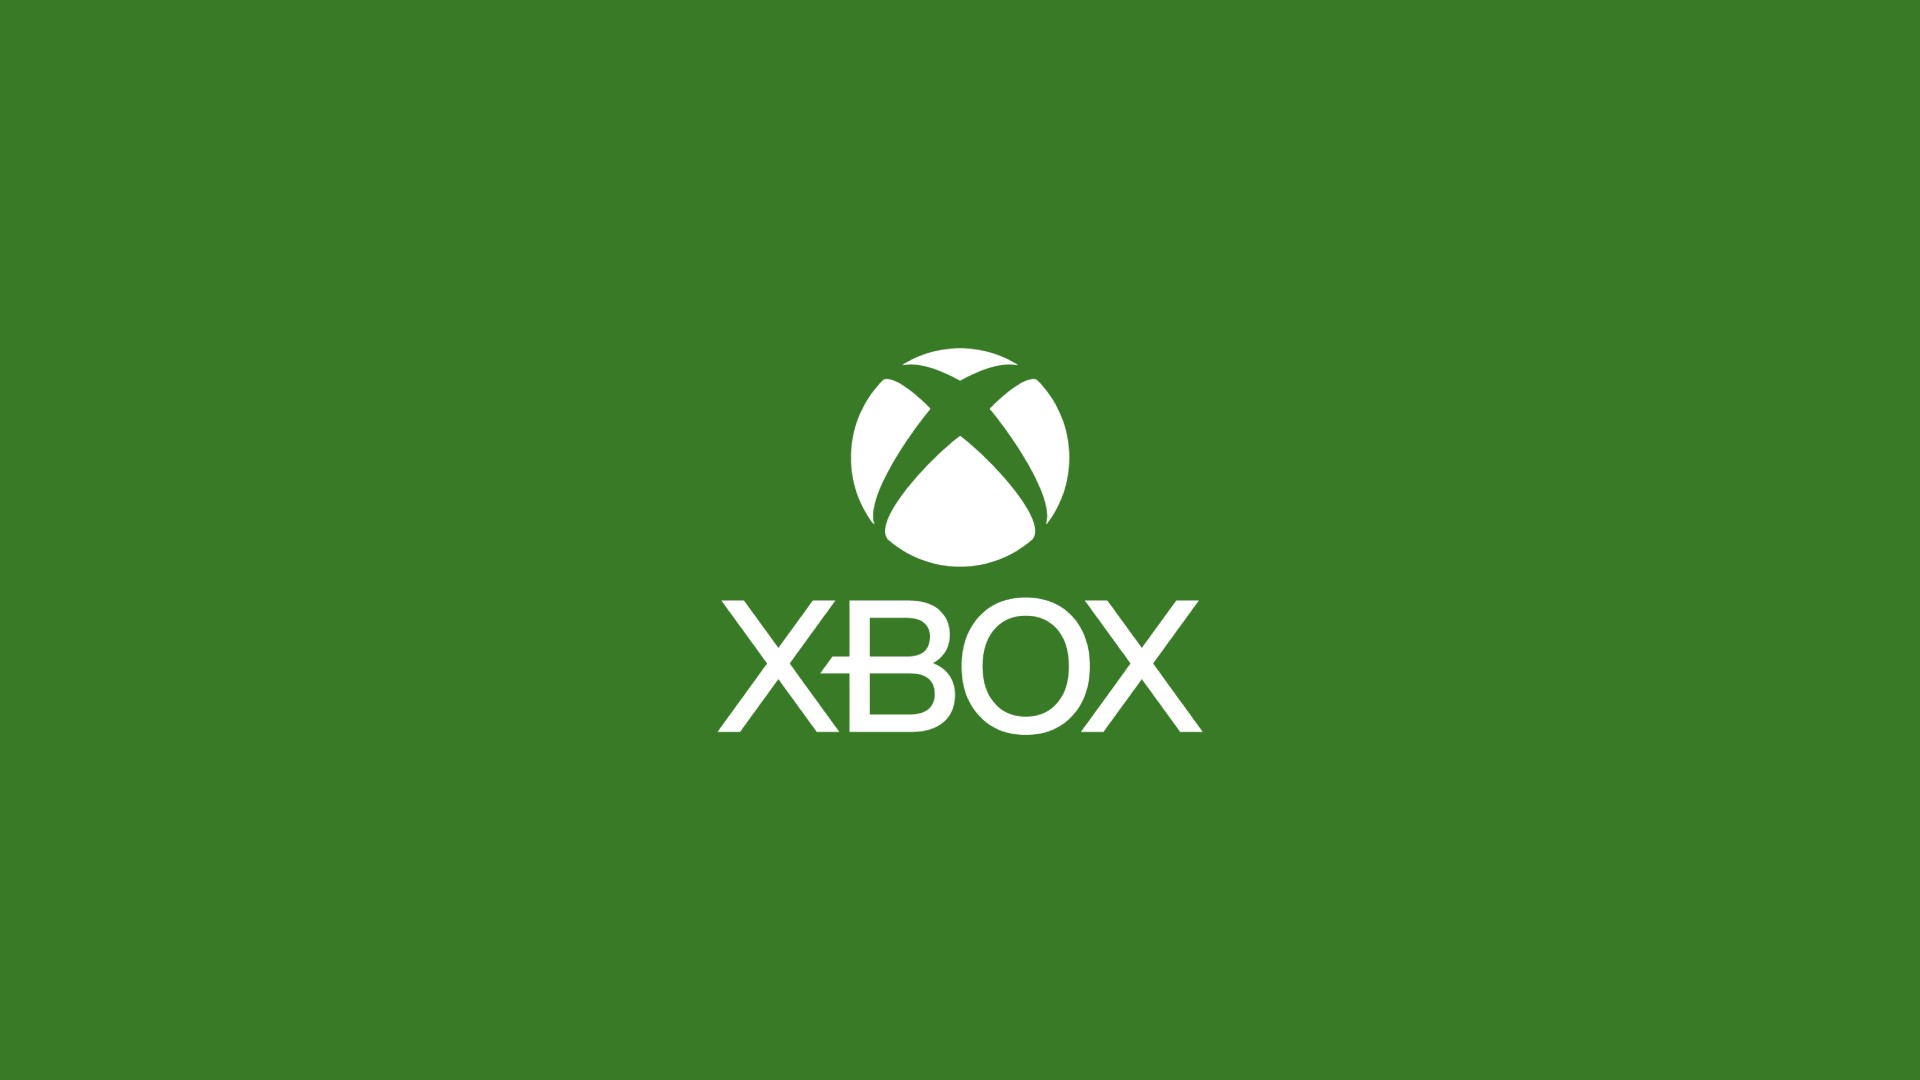 Future of Xbox Update Planned for Next Week, Announces Phil Spencer